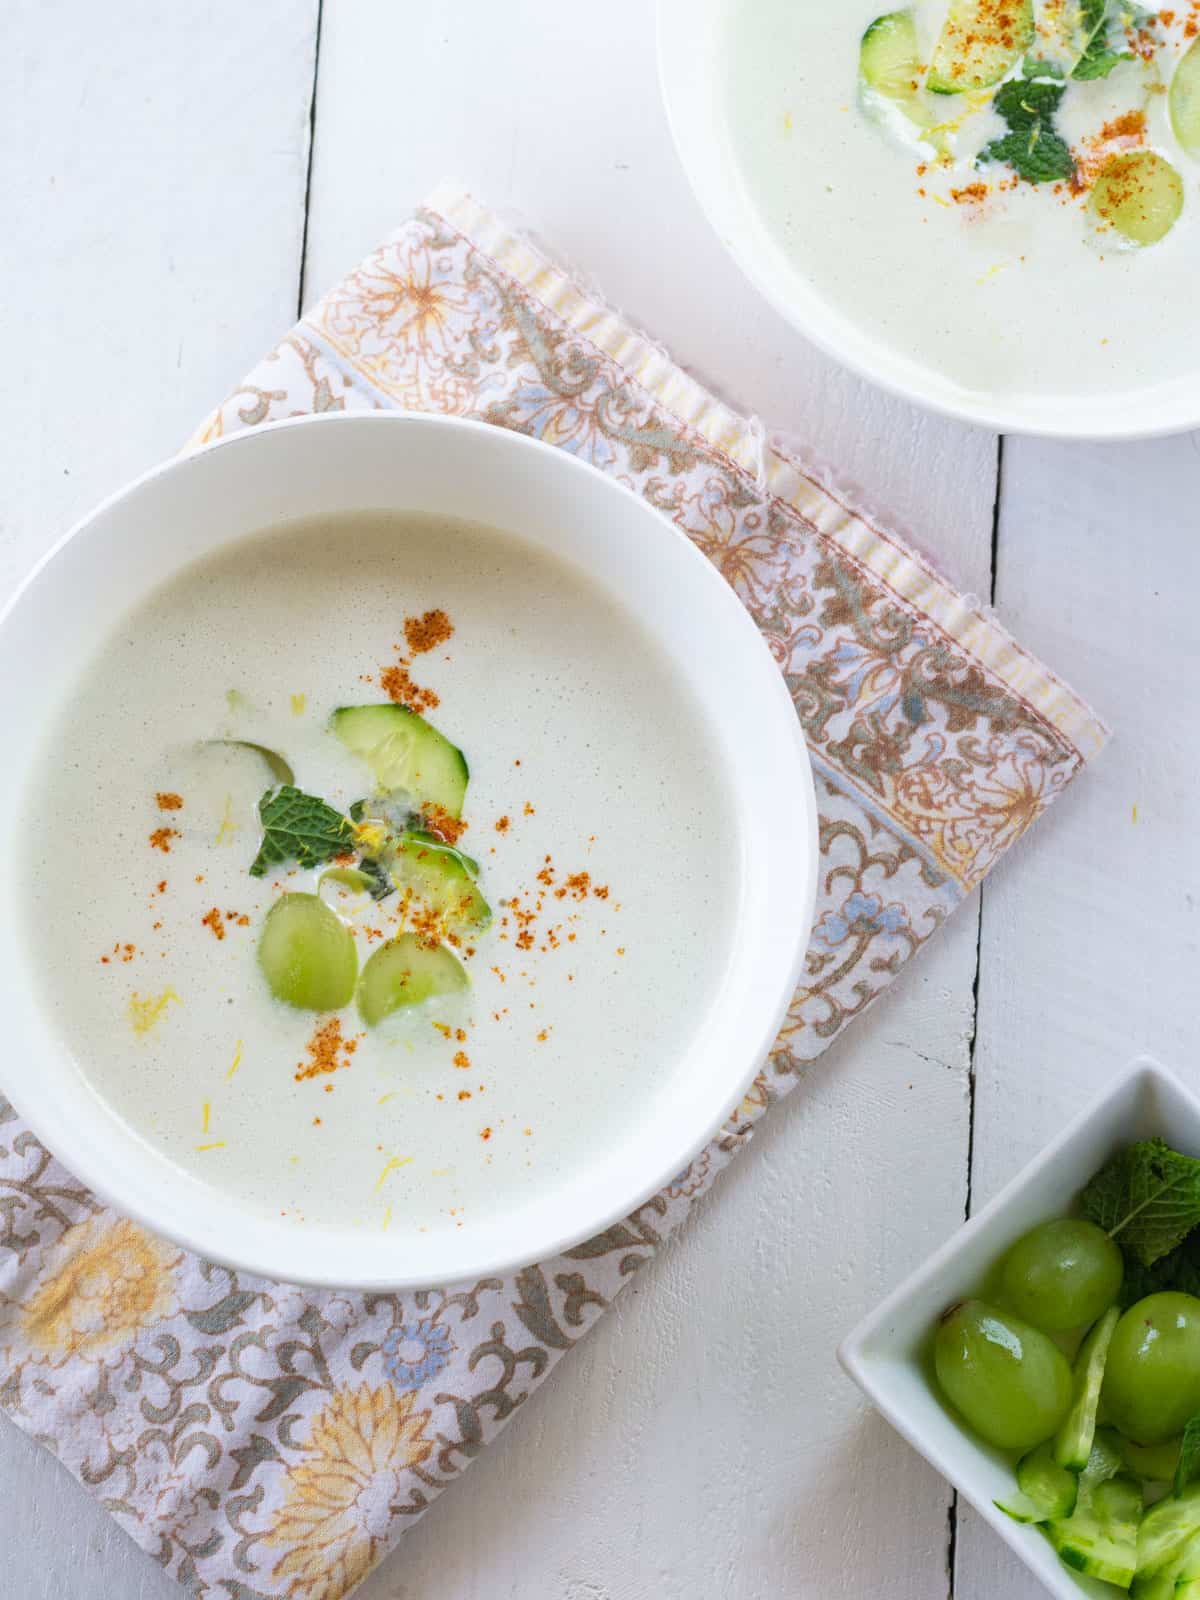 Smooth white gazpacho with green grapes, garlic, cucumber and almonds.